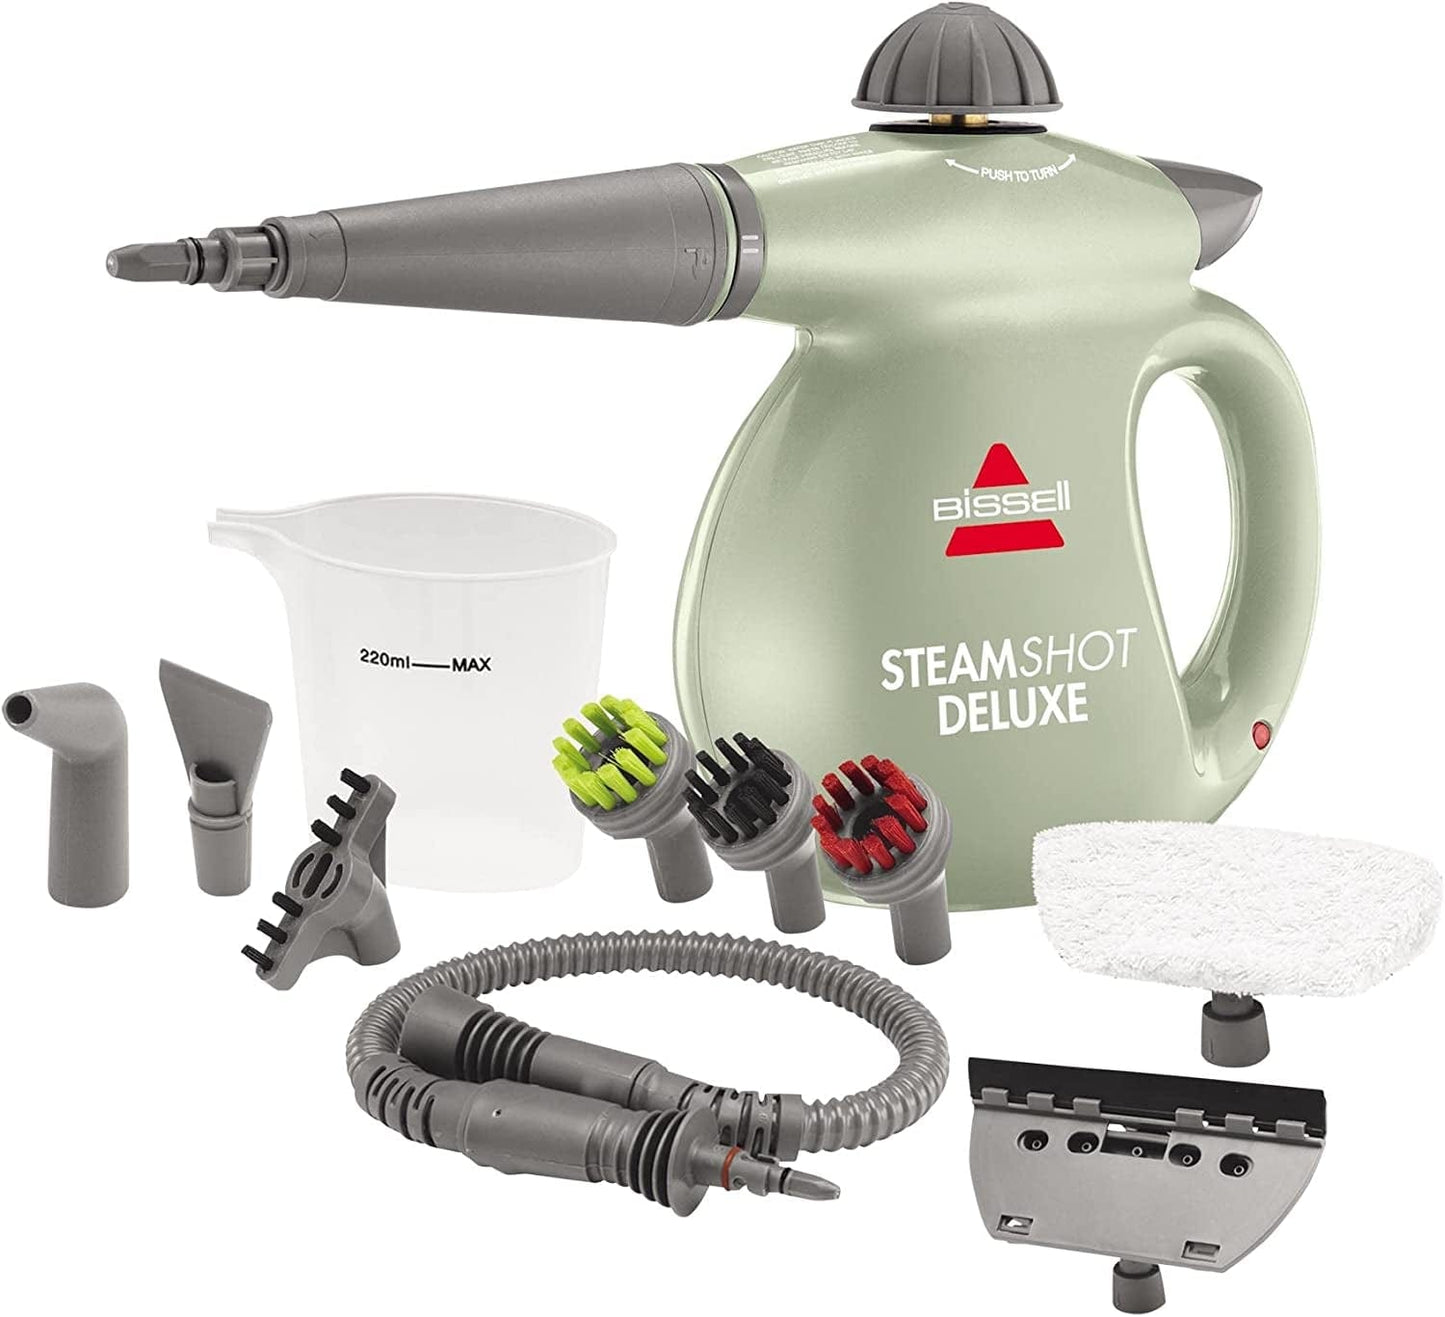 BISSELL Steamshot Deluxe Hard Surface Steam Cleaner with Natural Sanitization, Multi-Surface Tools Included to Remove Dirt, Grime, Grease, and More, 39N7A